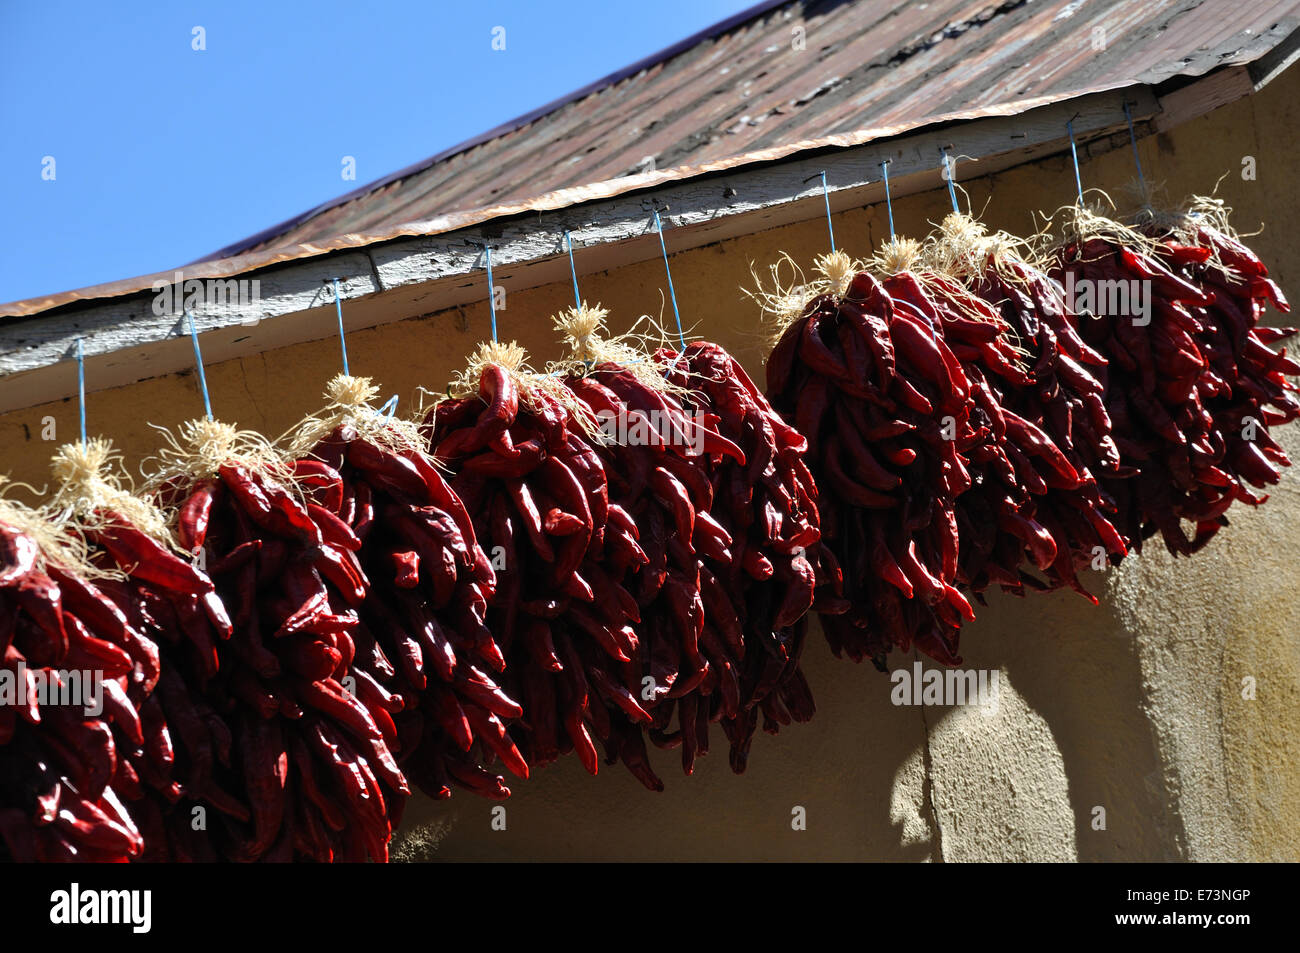 Chili peppers drying in downtown Albuquerque, New Mexico, USA Stock Photo